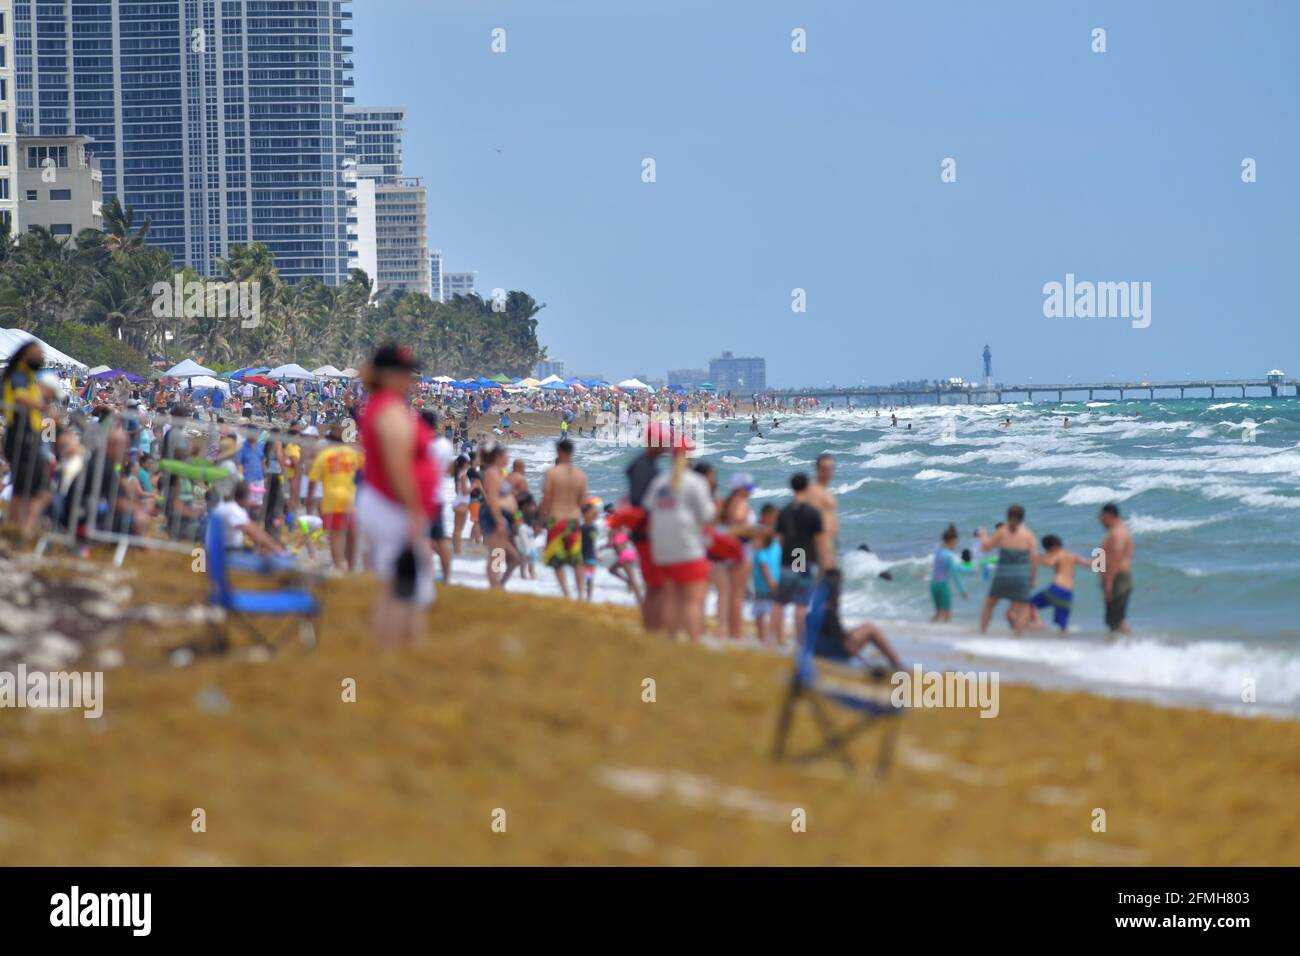 BROWARD COUNTRY, FL - MAY 09: (No sales New York Post) Atmosphere performs at the 2021 Florida Air Show on May 9, 2021 on the Beach in Broward County, Florida People: Atmosphere Credit: Storms Media Group/Alamy Live News Stock Photo